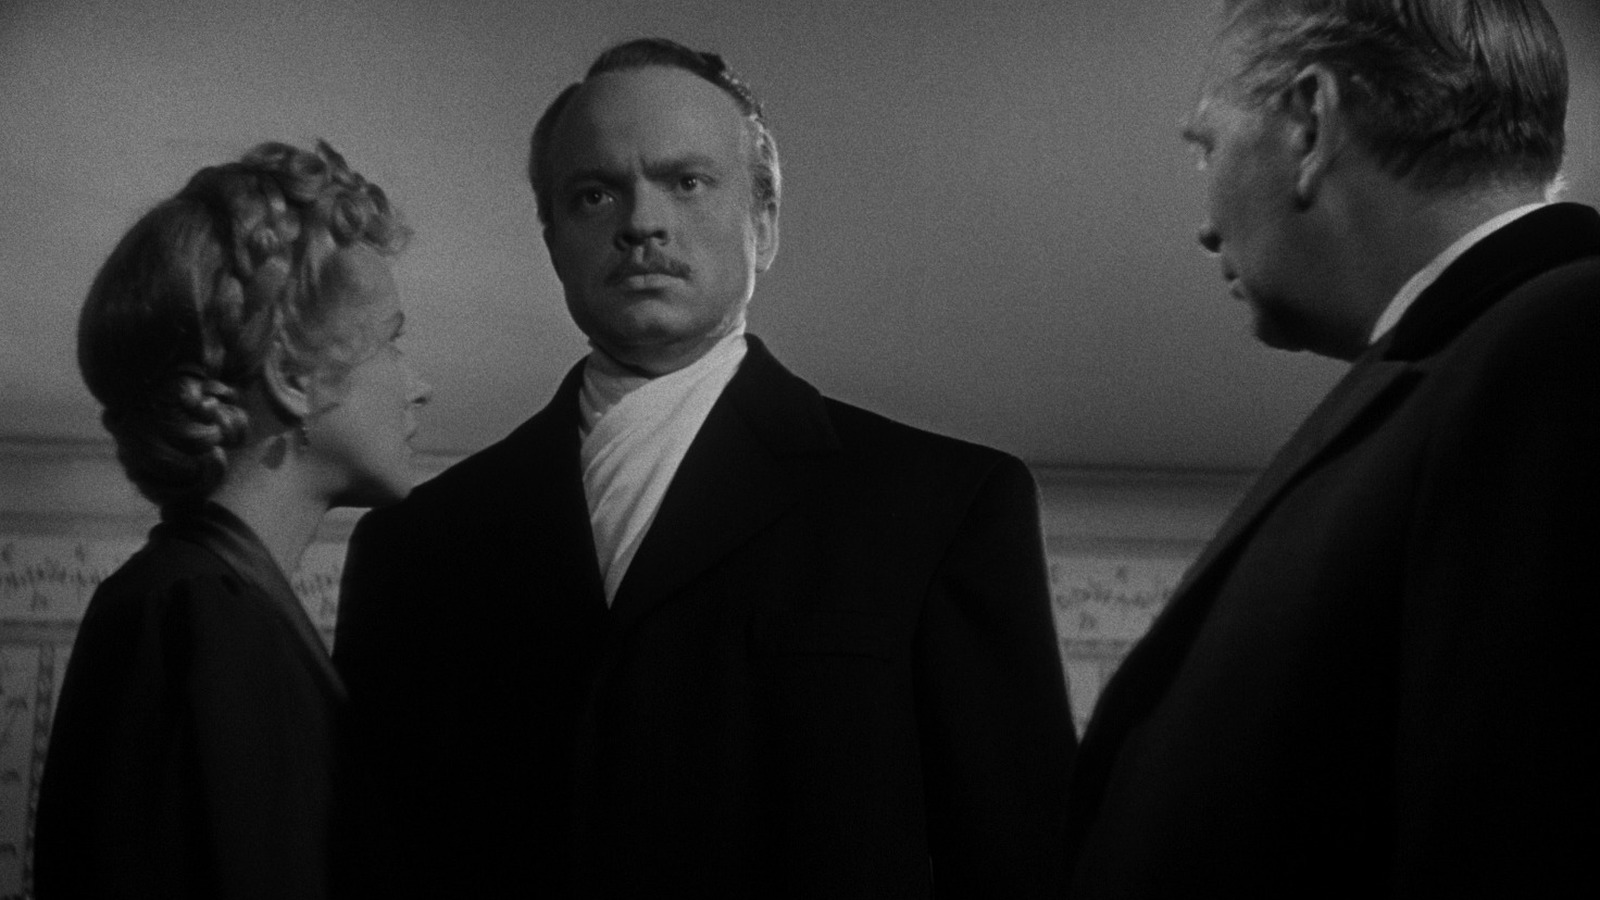 Citizen Kane Wasn't Always Seen As A Cinematic Classic